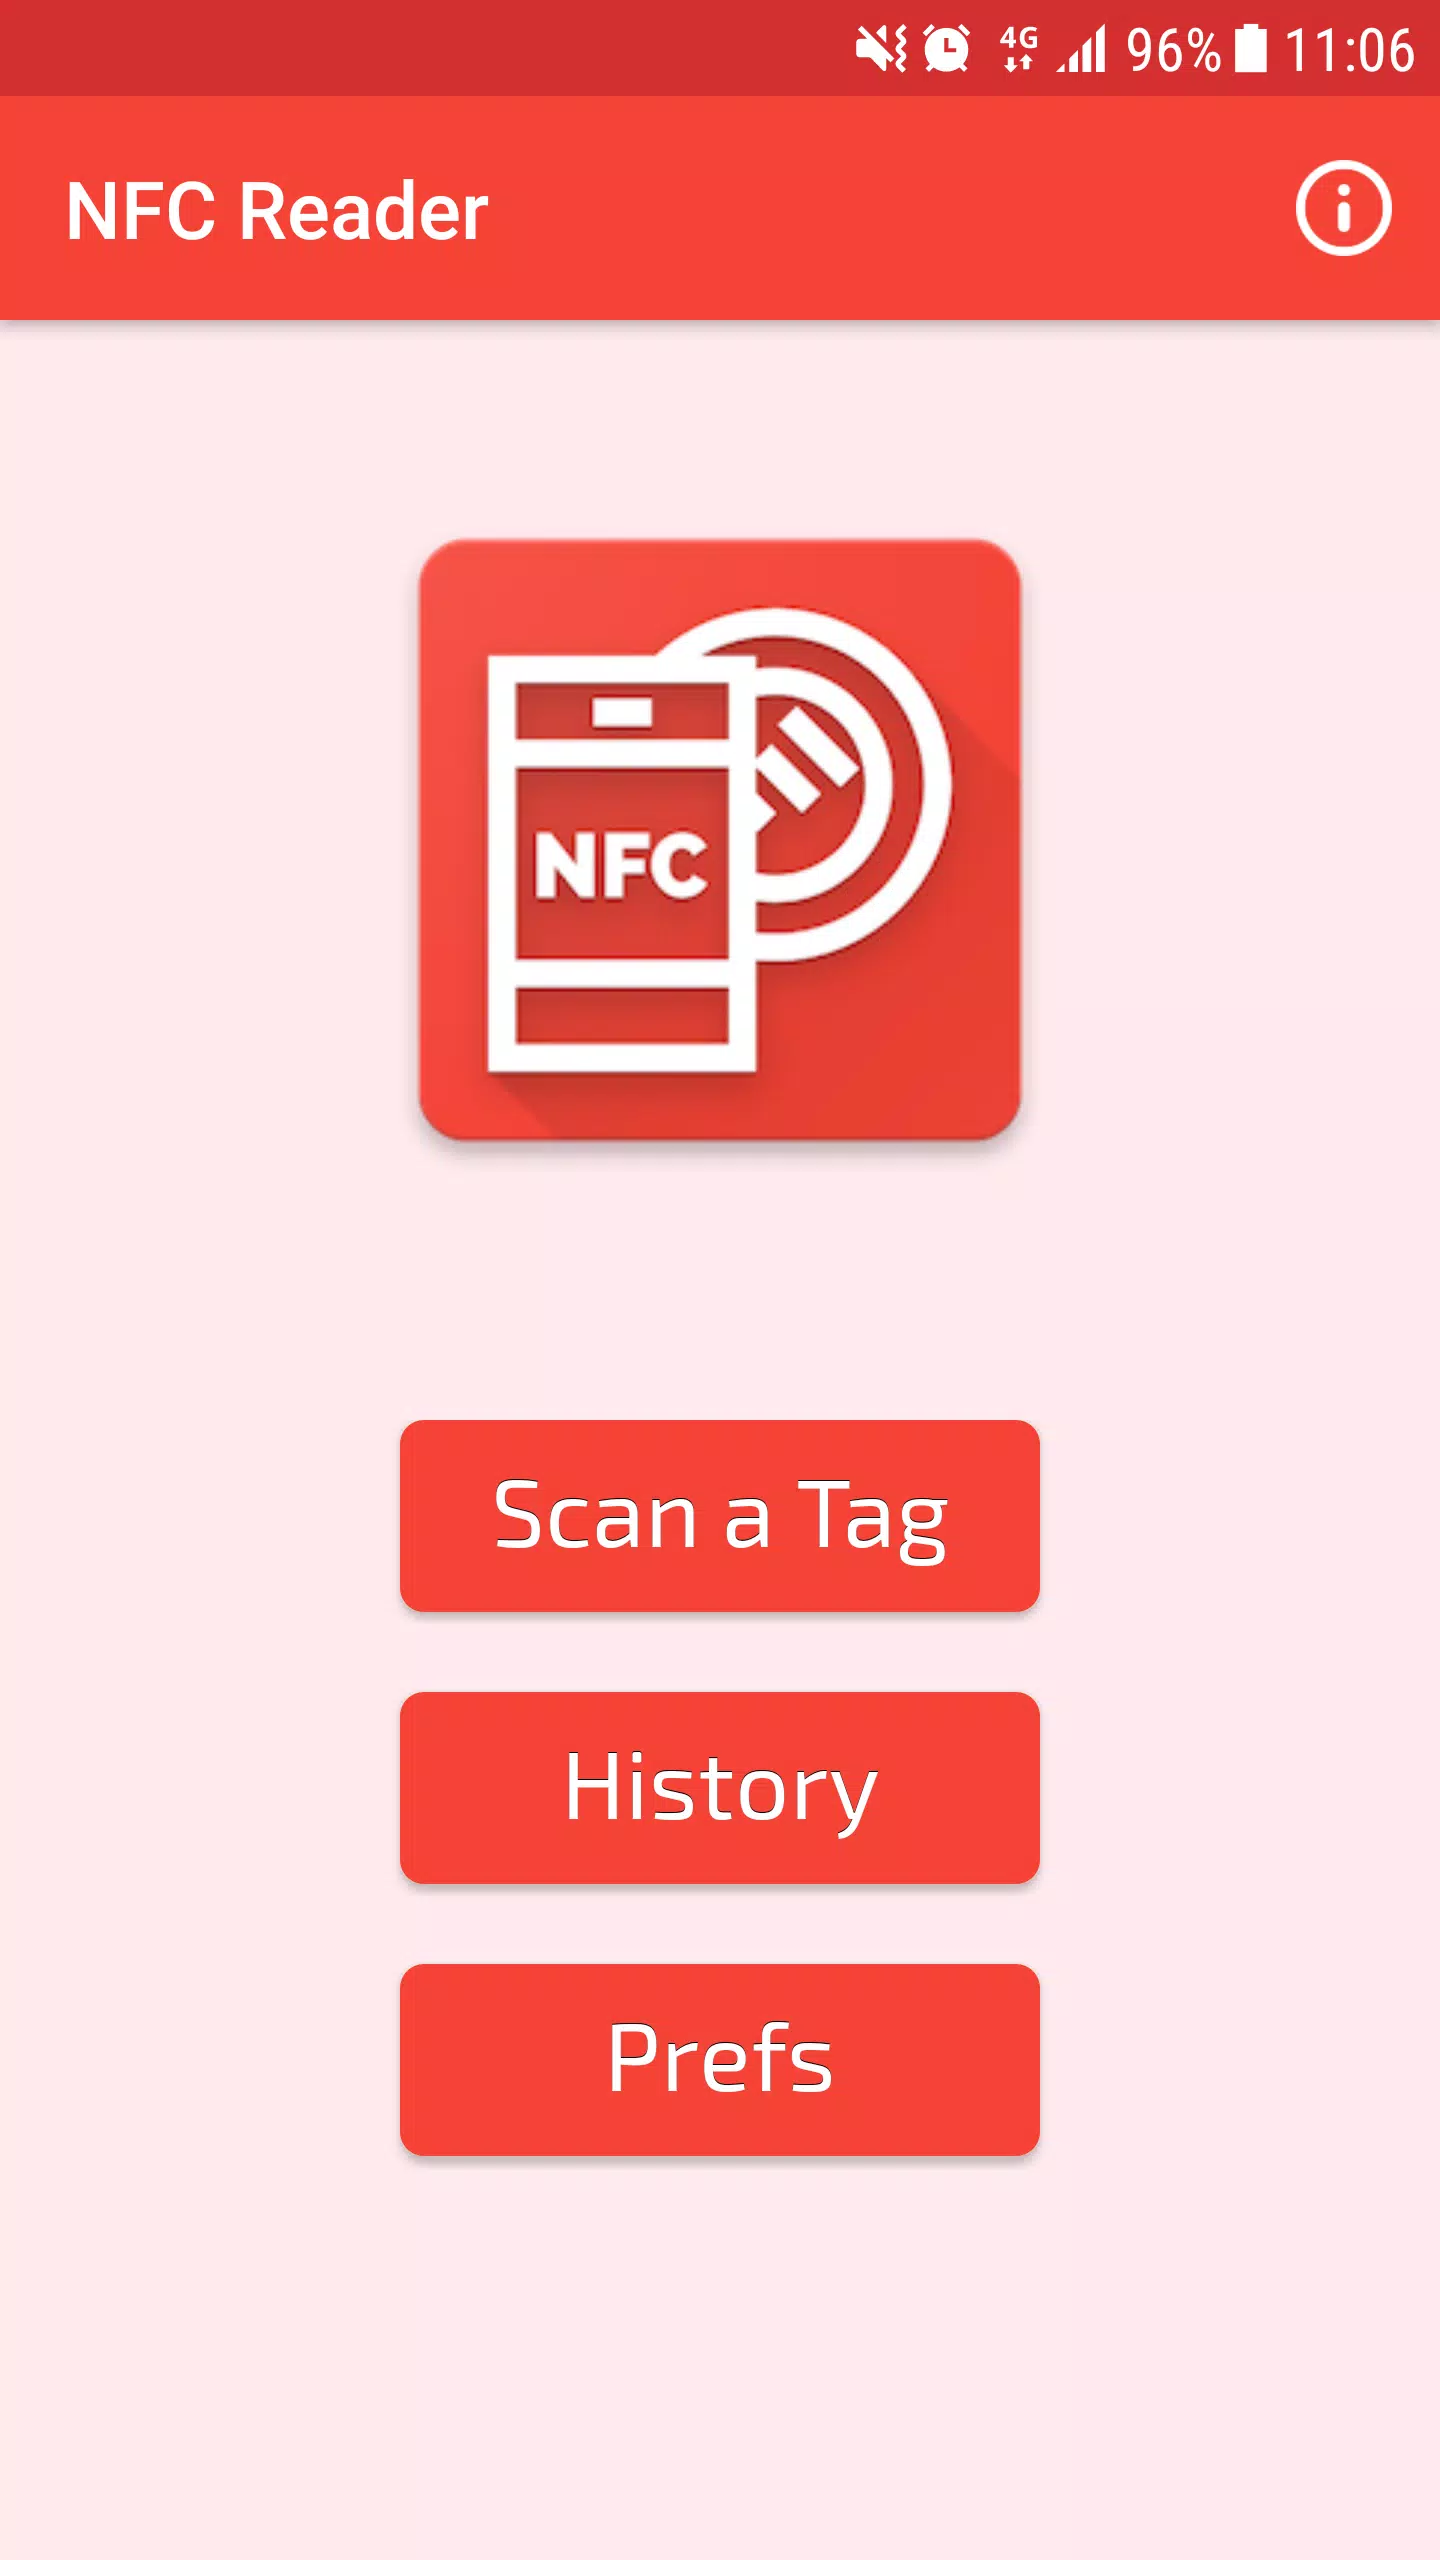 NFC Reader for Android - APK Download